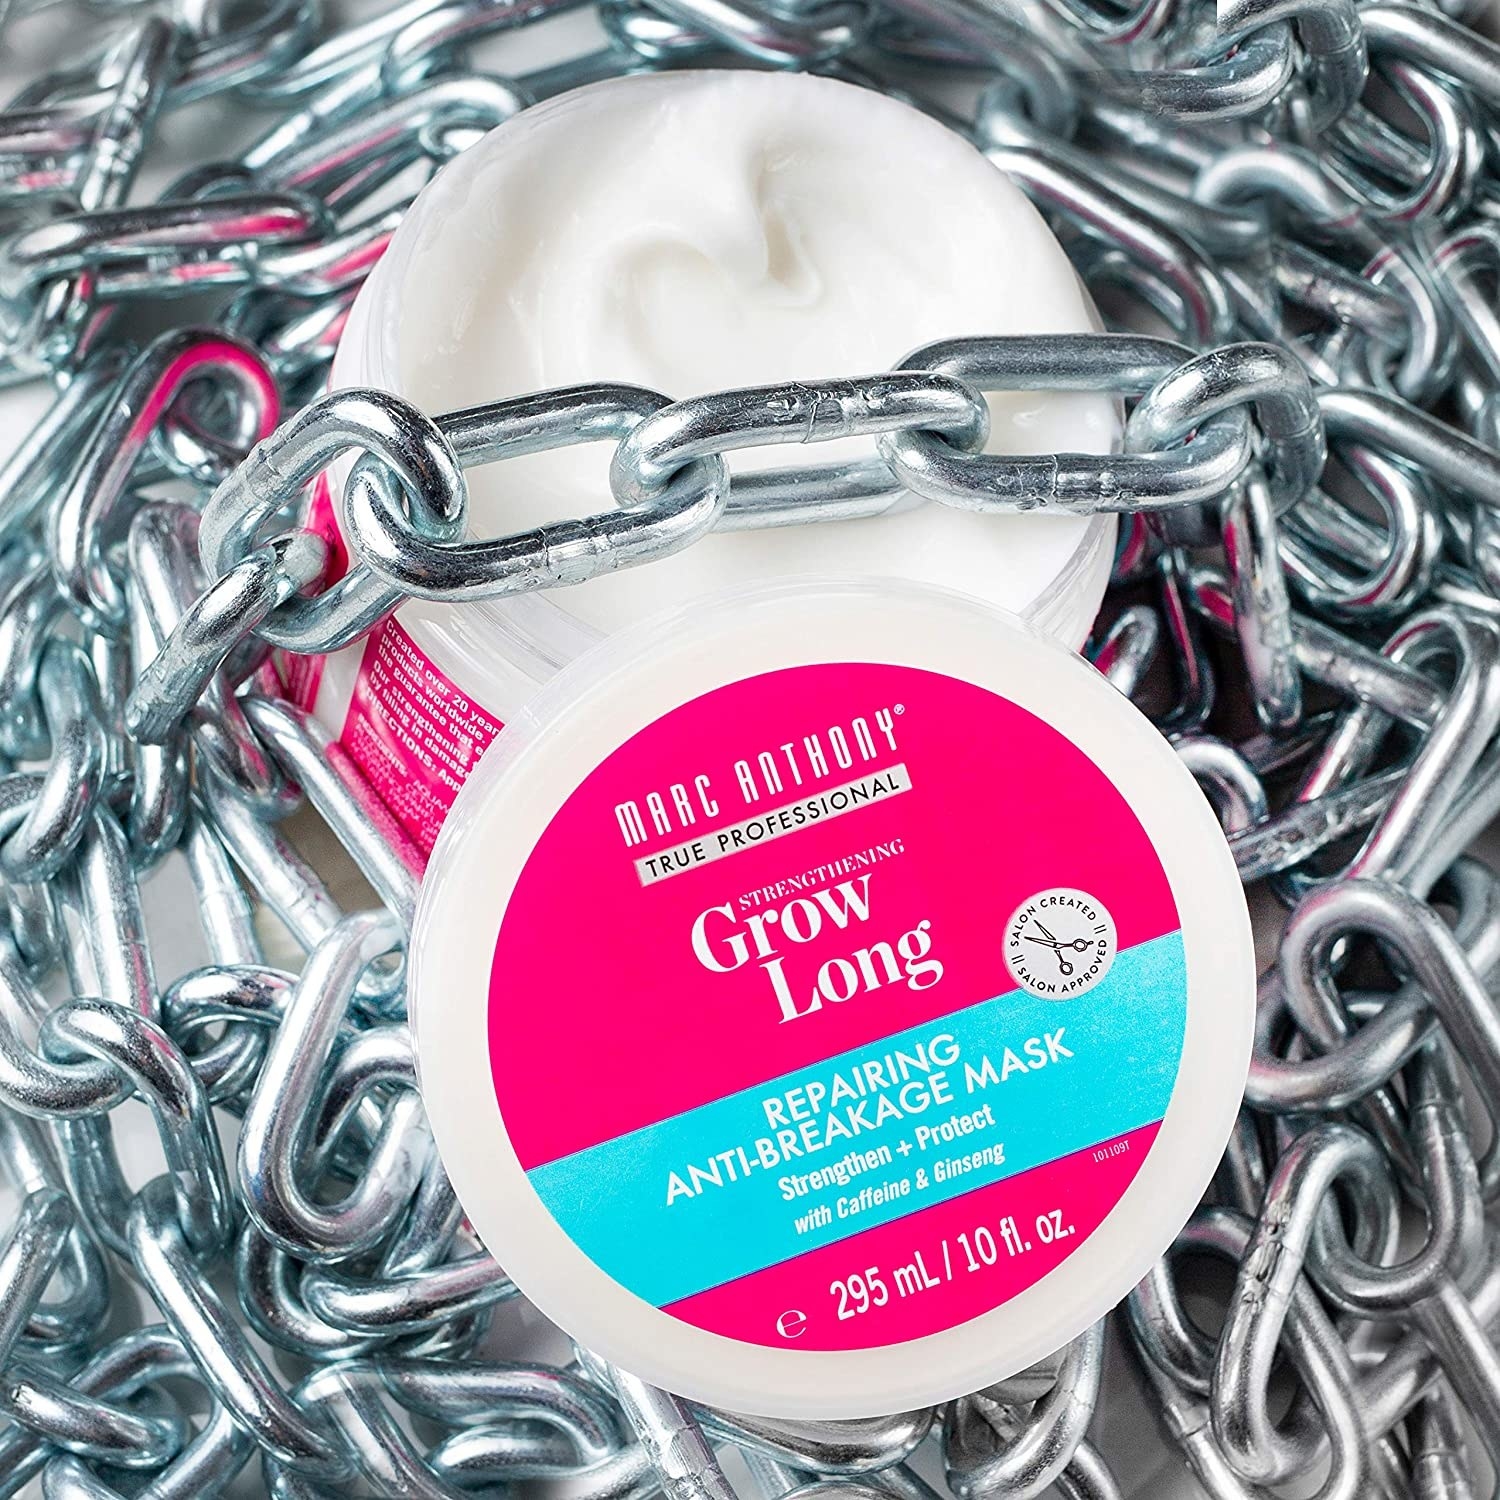 A tub of the hair mask on a pile of chains